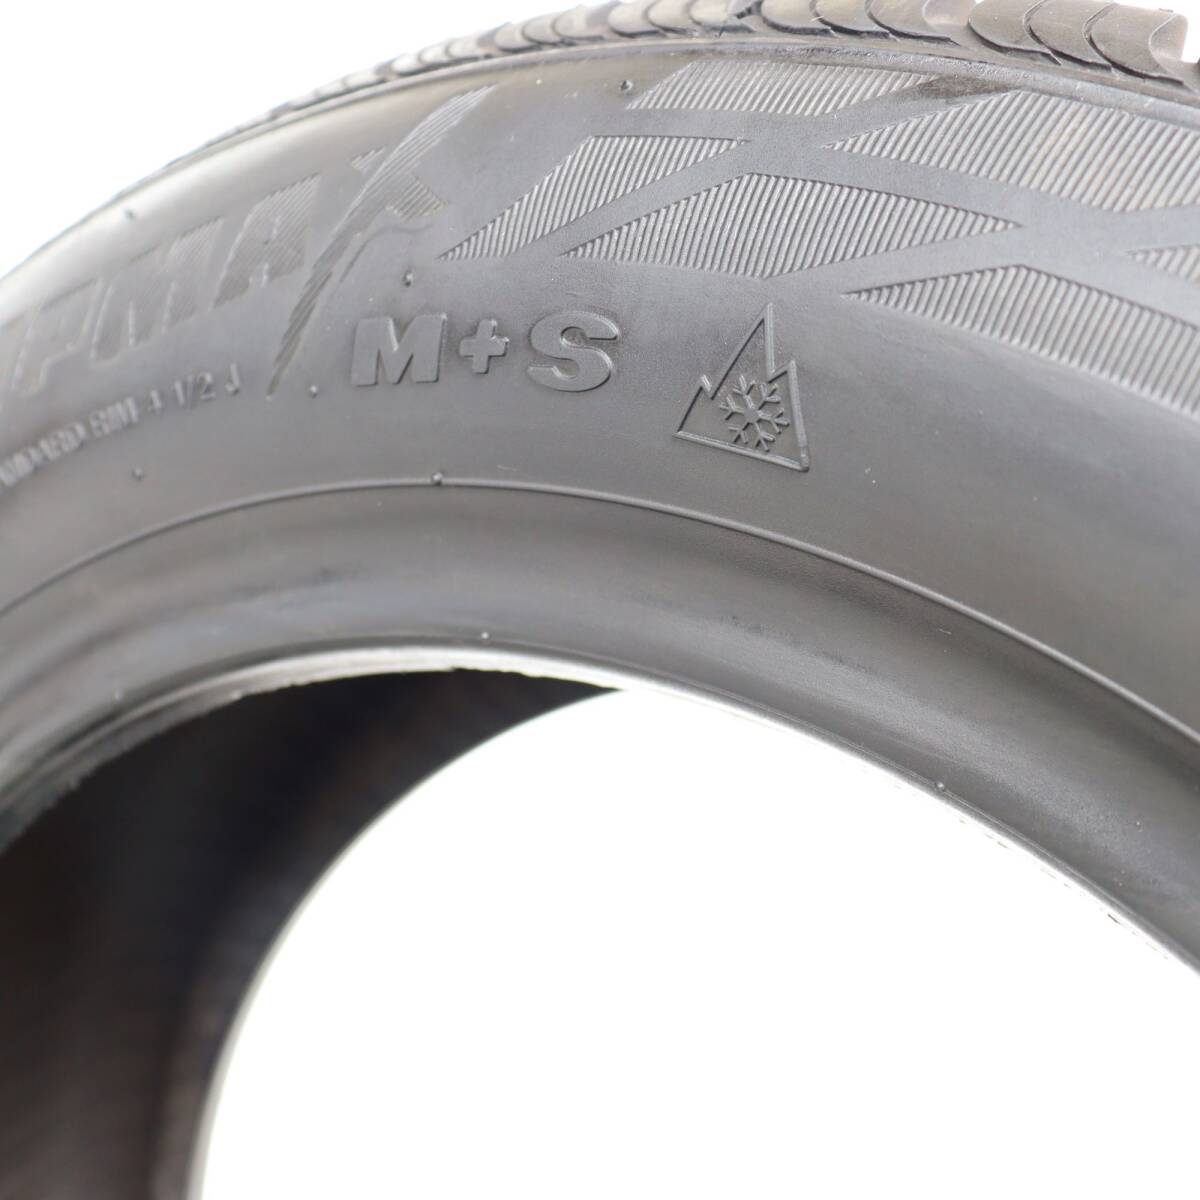 165/60R15 77H GRIPMAX SUREGRIP A/S NANO 23 year made snow flakes Mark attaching all season tire free shipping 4 pcs set tax included \\20,800..1